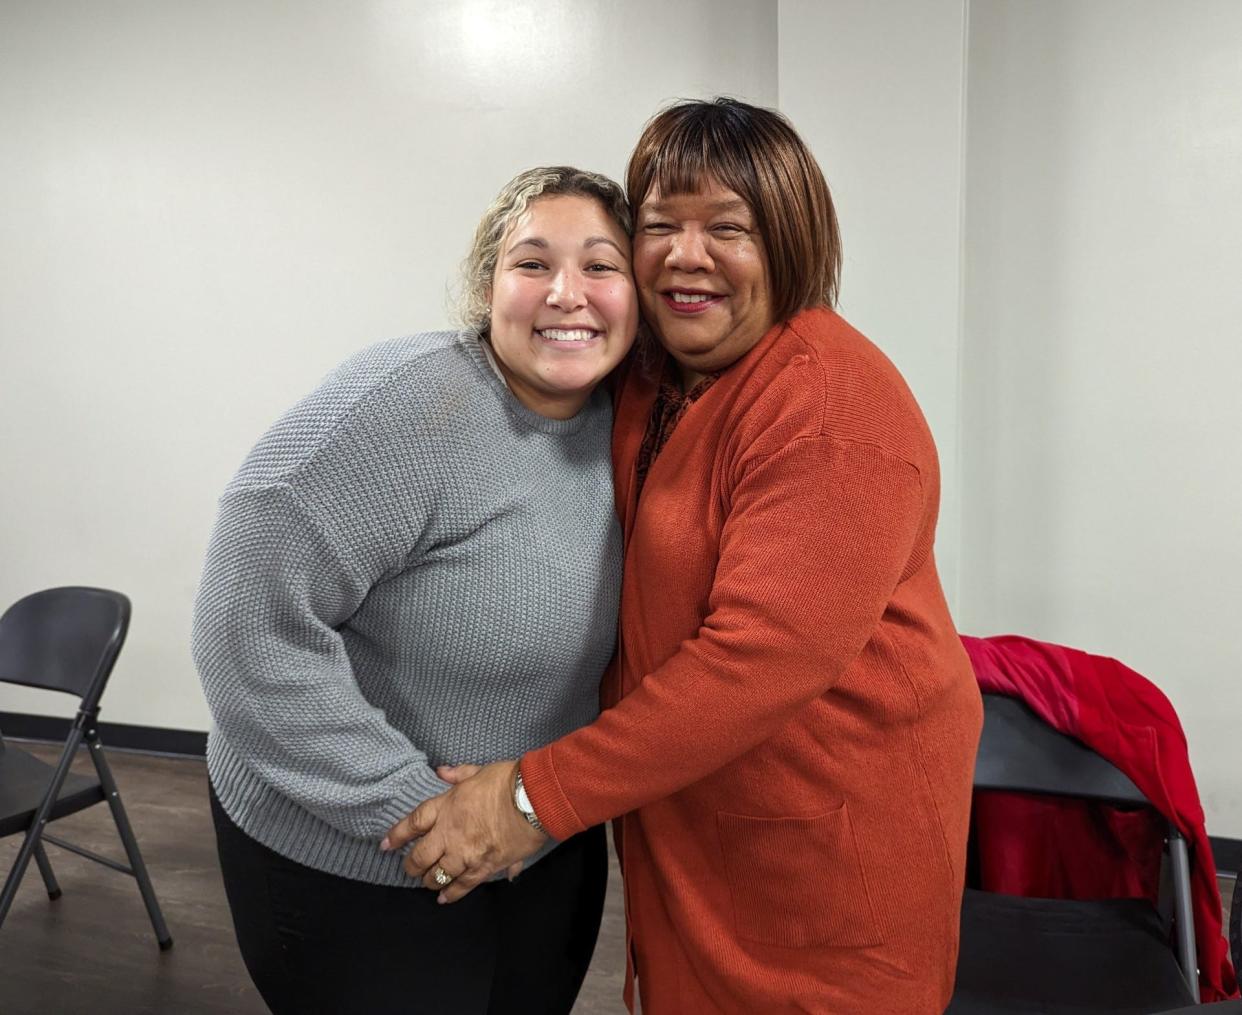 Malone University student Mykayla Askew, left, and Patty Stokes Williams, who grew up in southeast Canton, embrace. Askew interviewed Williams for a student research project examining how urban renewal upended the neighborhood.